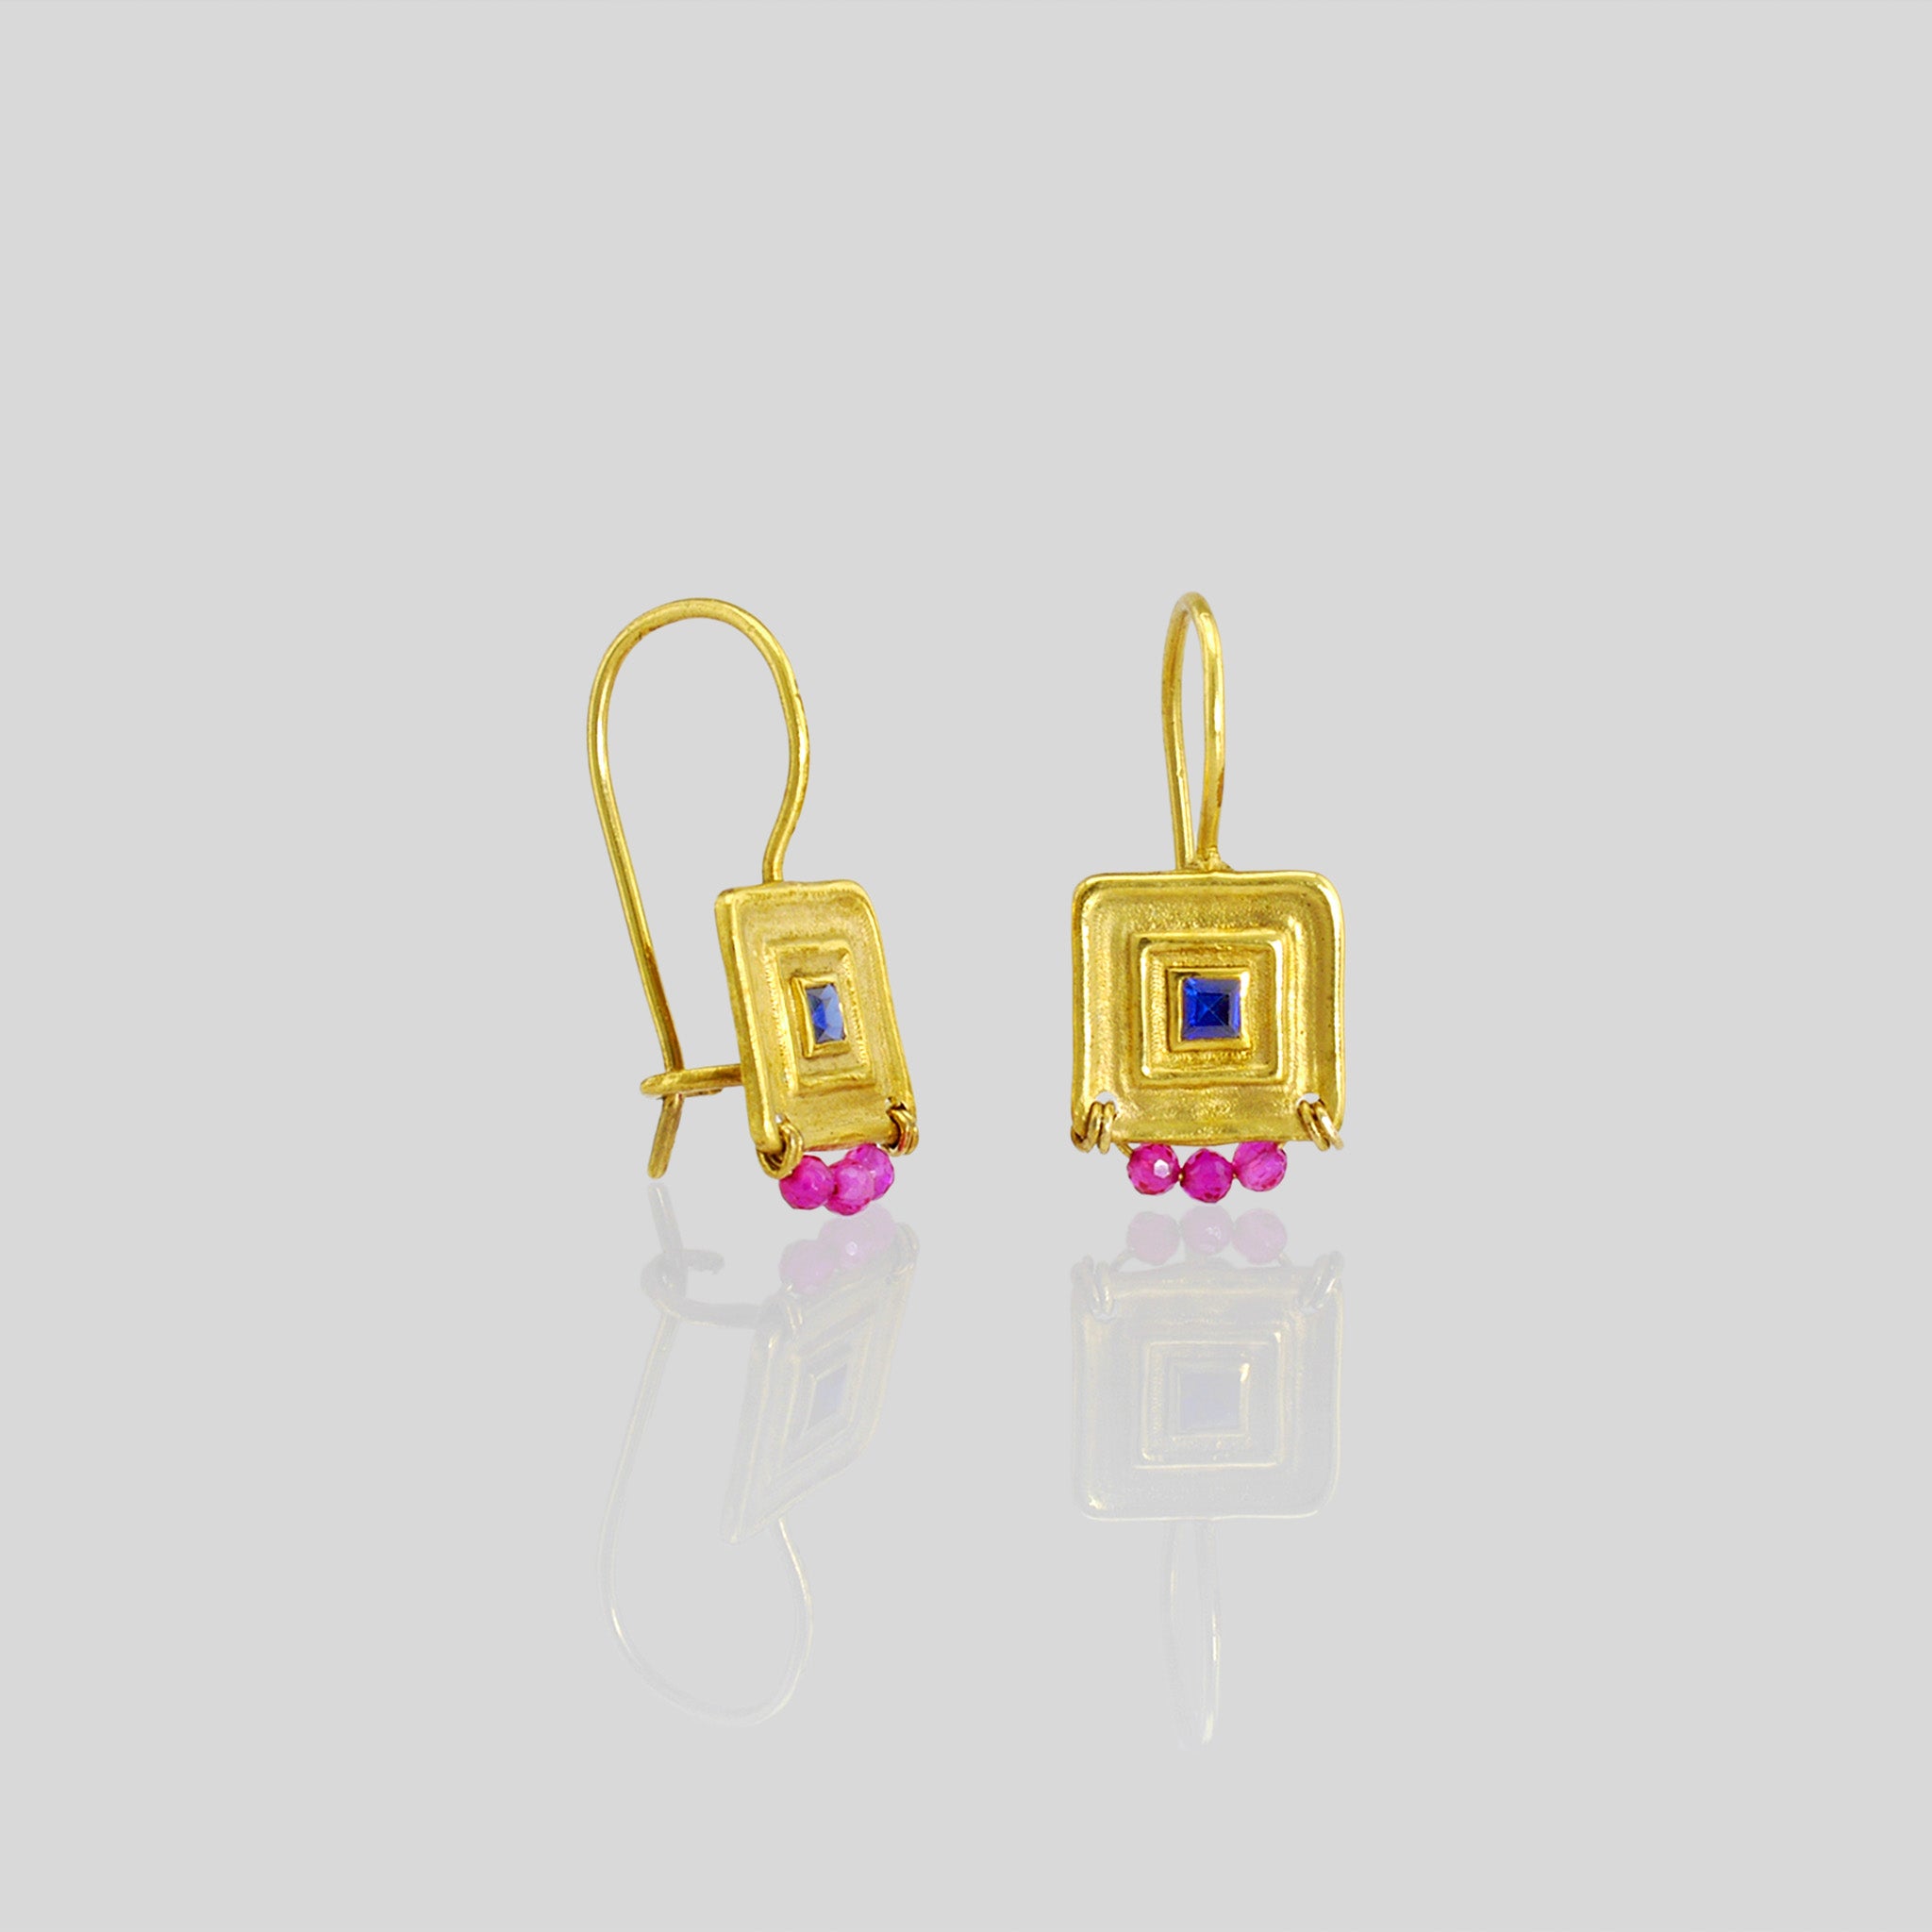 Unique gold square drop earrings featuring a square sapphire gemstone framed by a line pattern, with three hand-woven ruby beads at the bottom for an elegant Egyptian vibe.